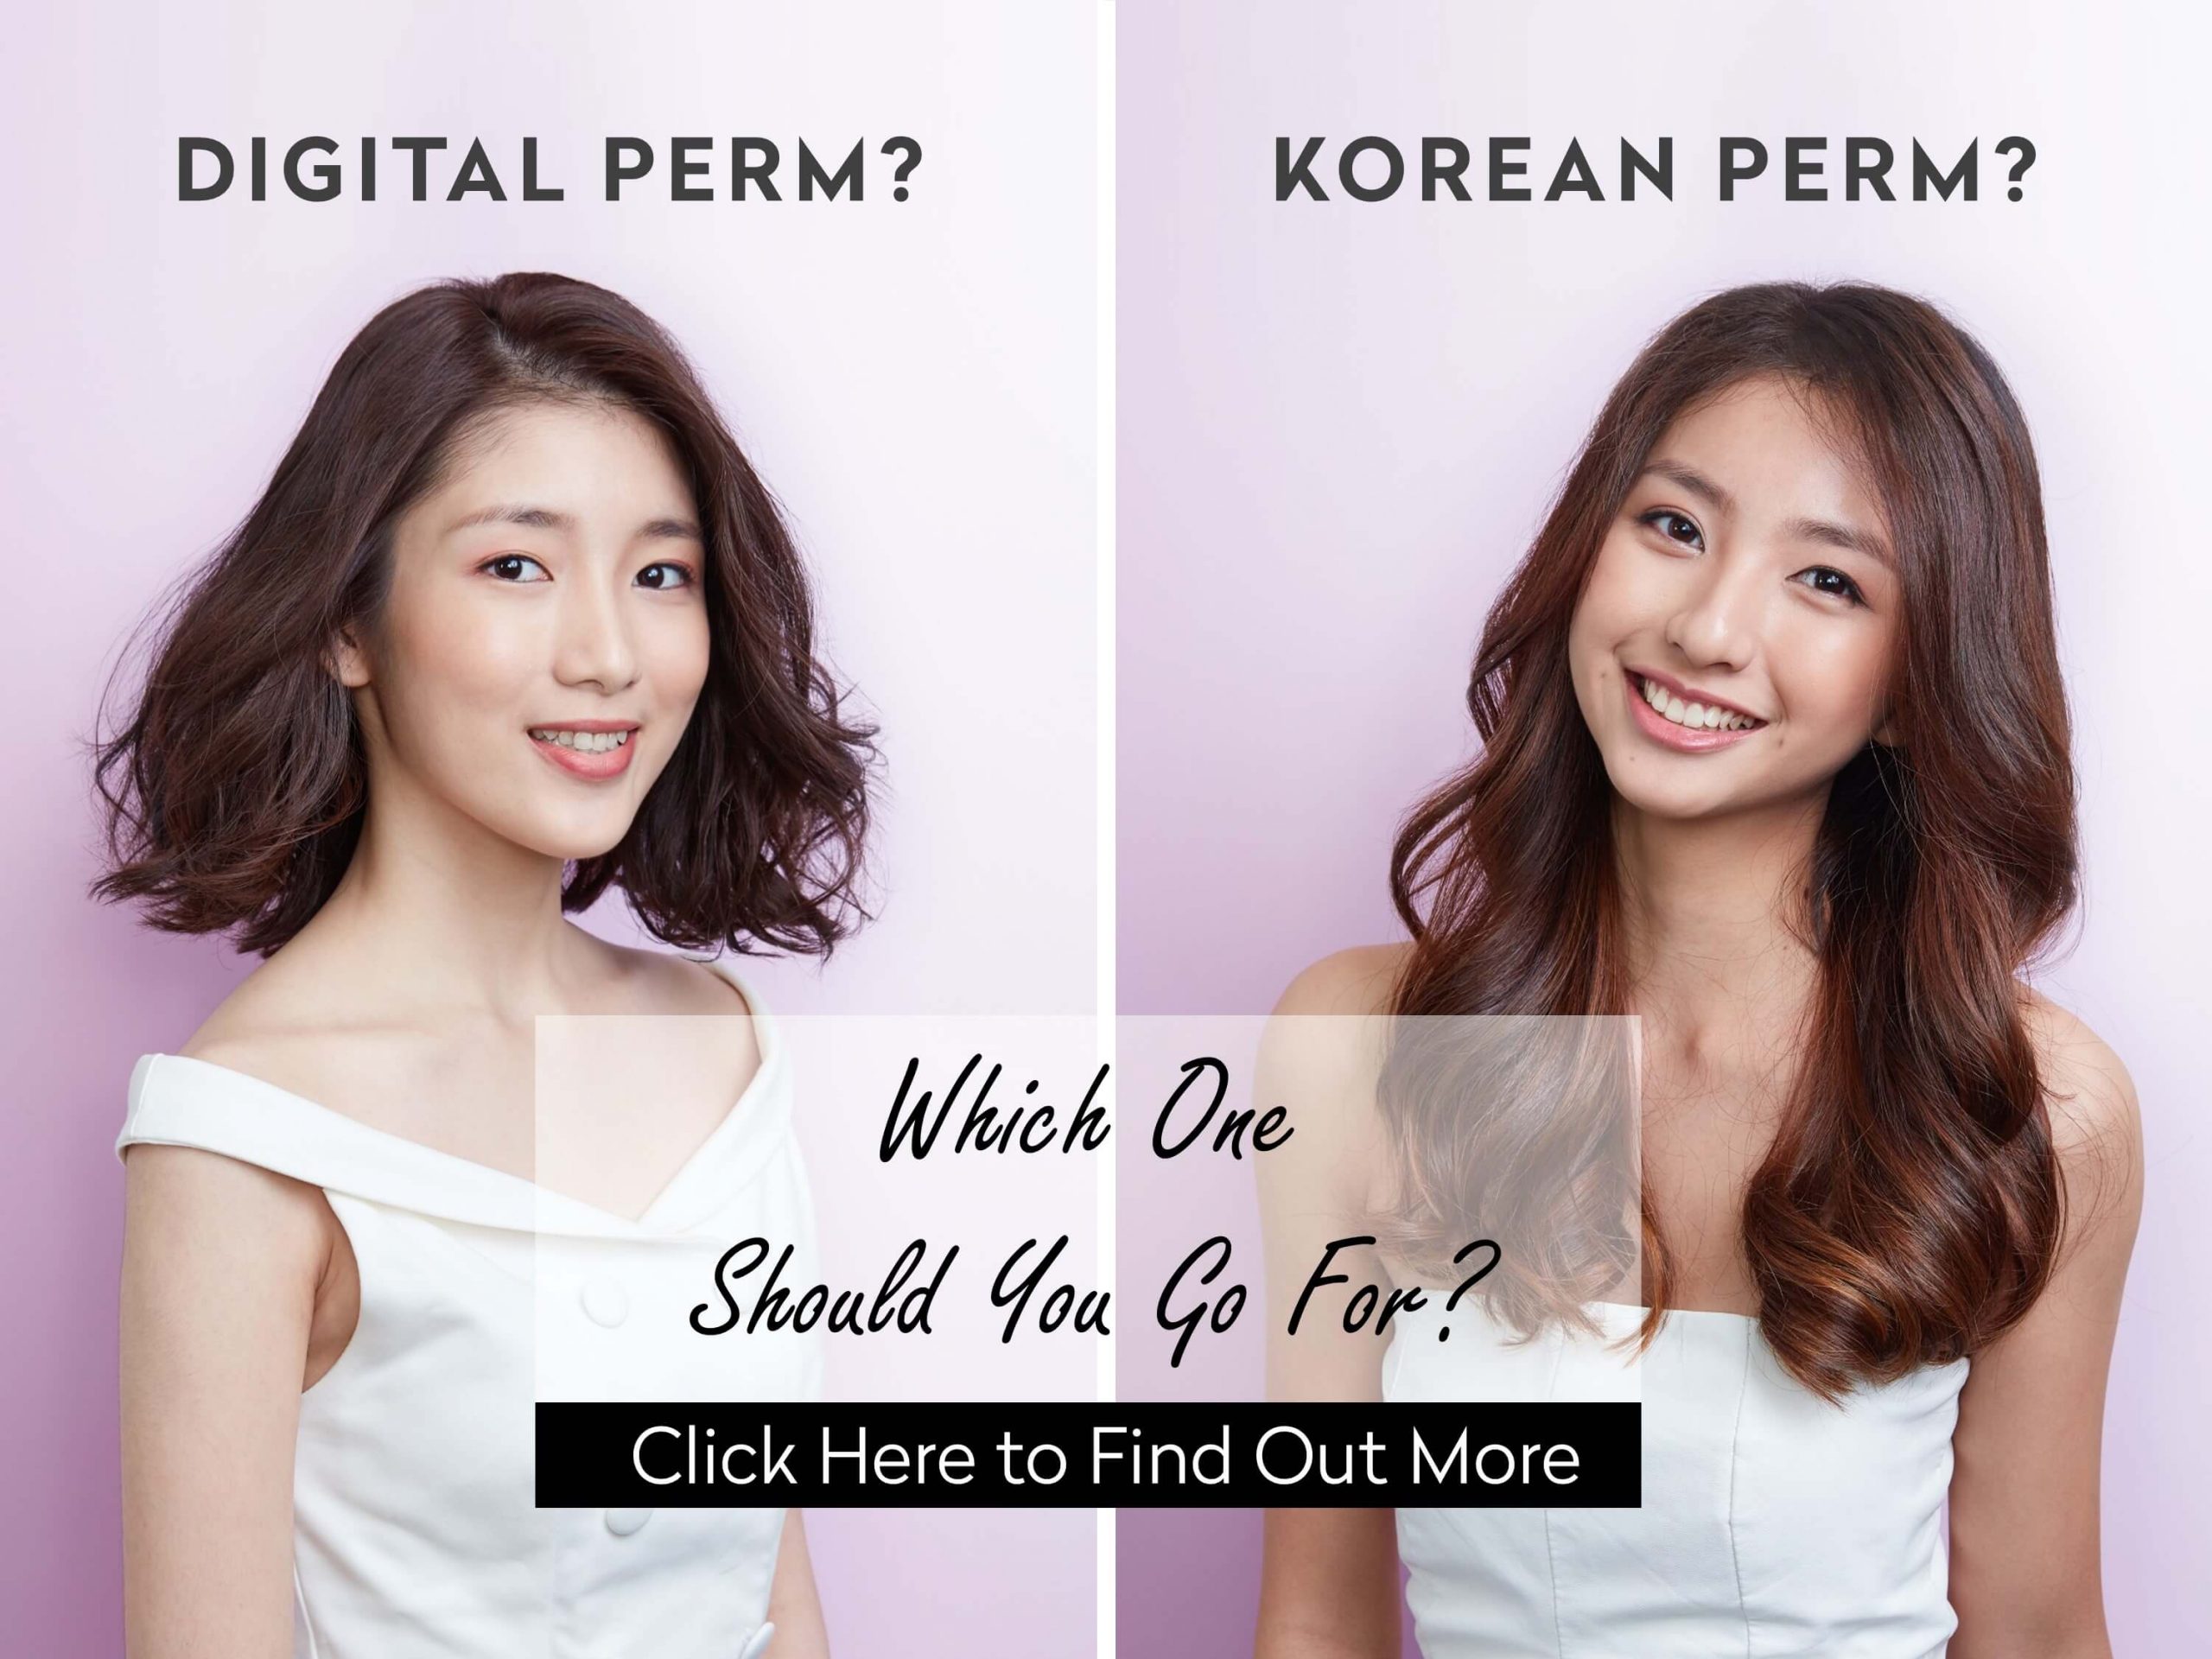 https://chezvoushair.com/korean-perm-or-digital-perm-top-7-myths-vs-facts-you-must-know/